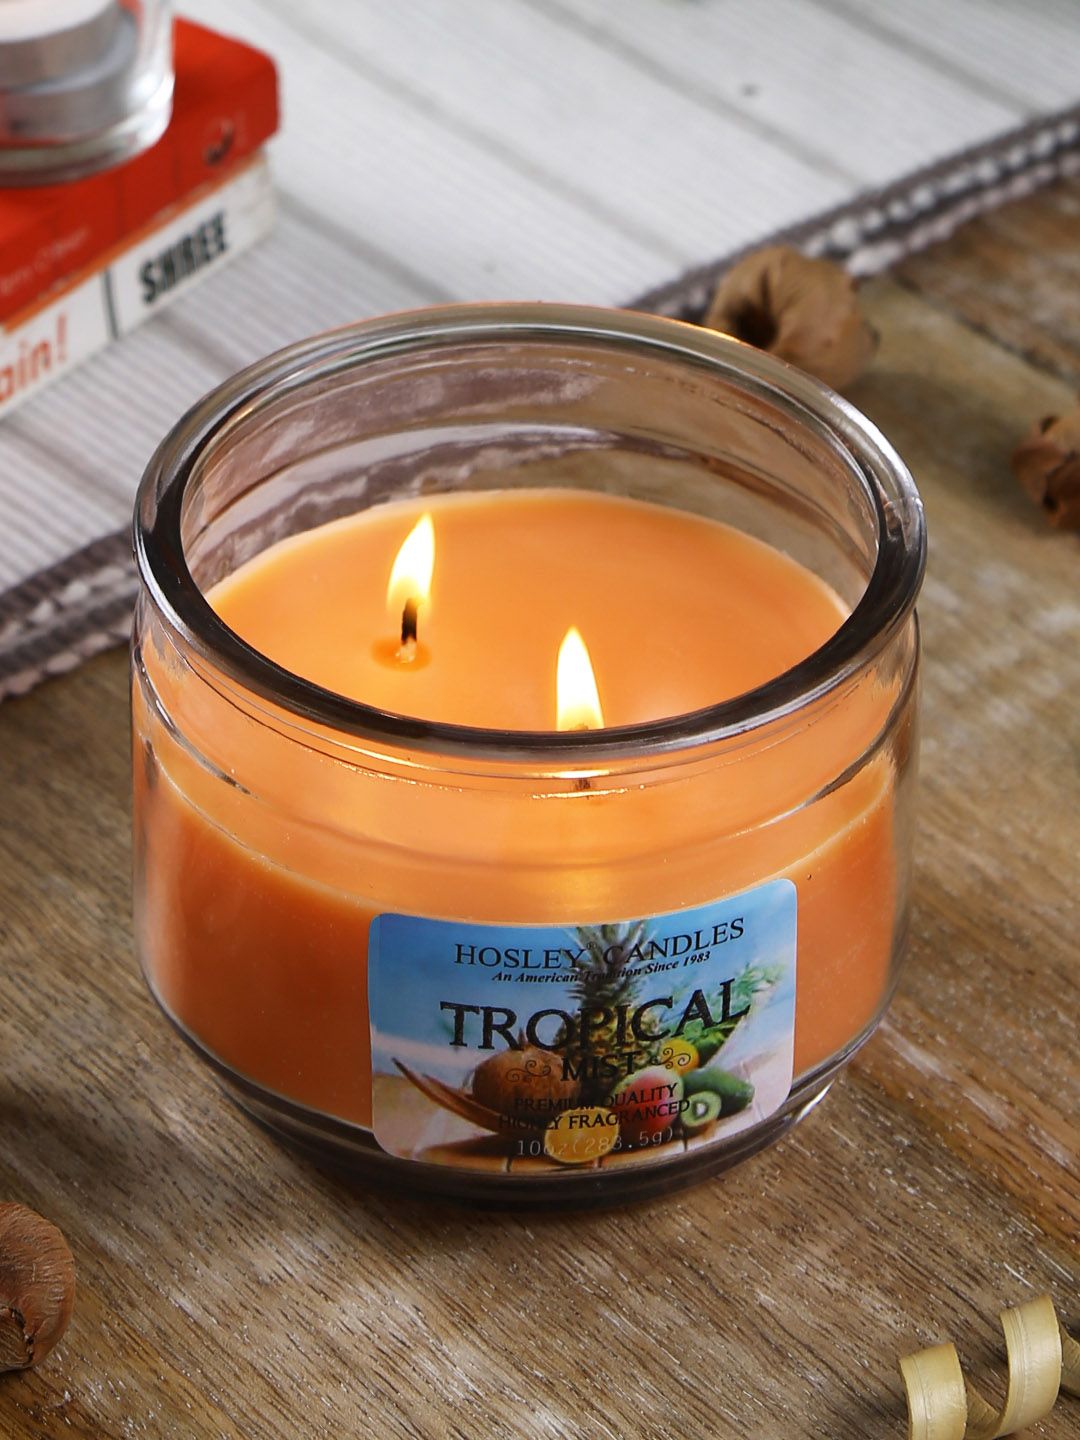 HOSLEY Orange Tropical Mist Scented 2-Wick 10 oz Jar Candle Price in India